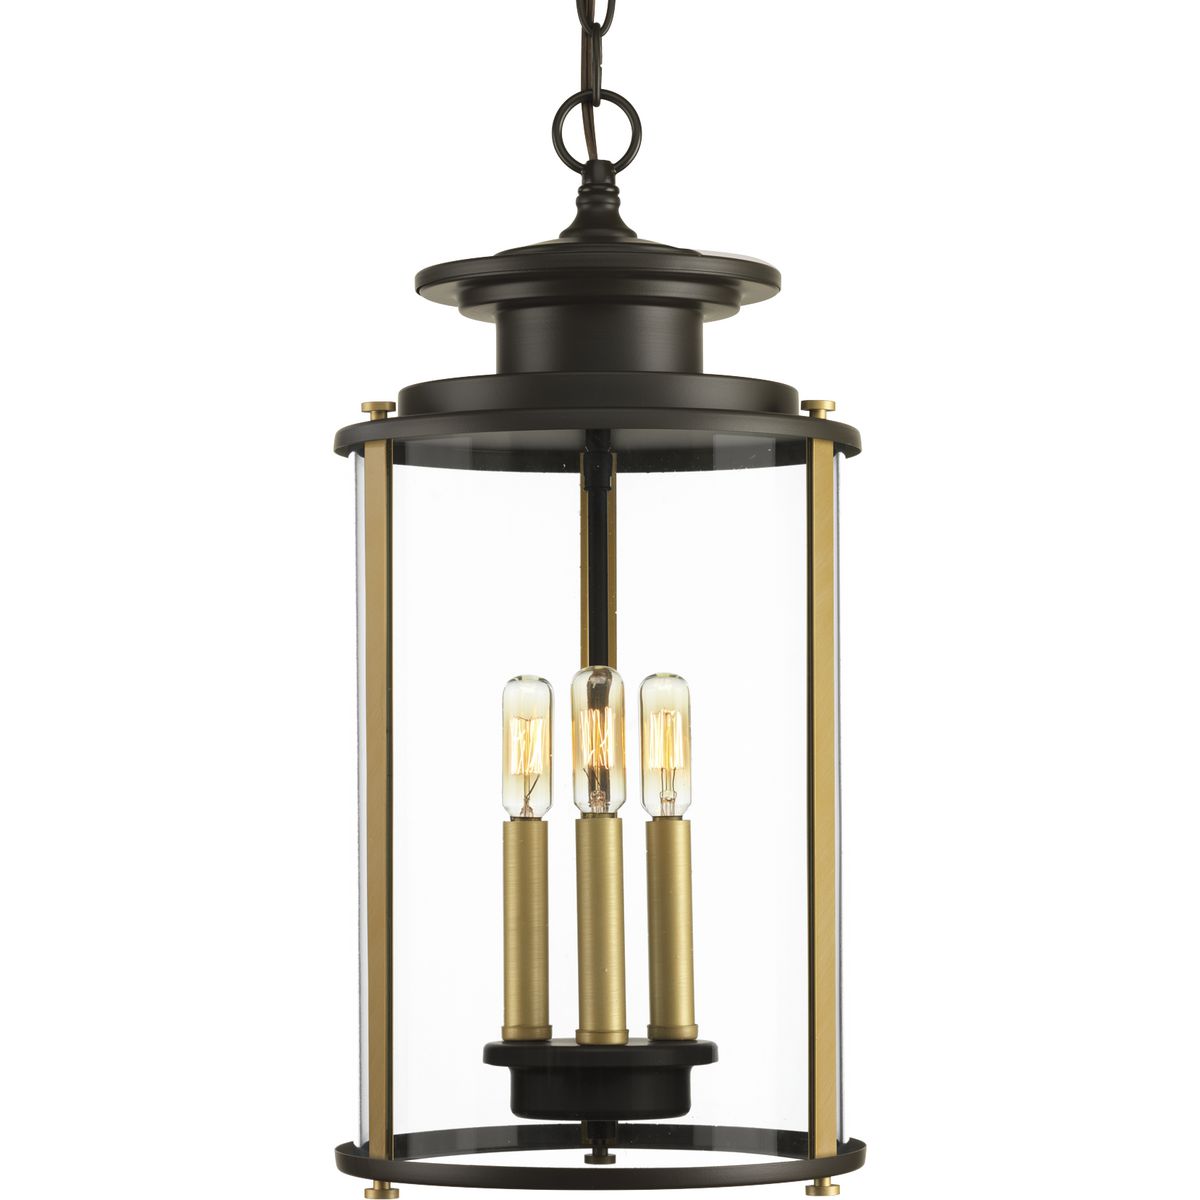 Squire three light hanging lantern features a classic traditional profile with clean, modern metal fittings. The Antique Bronze finish is accented with contrasting Vintage Brass metallic elements, the cylindrical frame is comprised of a clear glass diffuser.